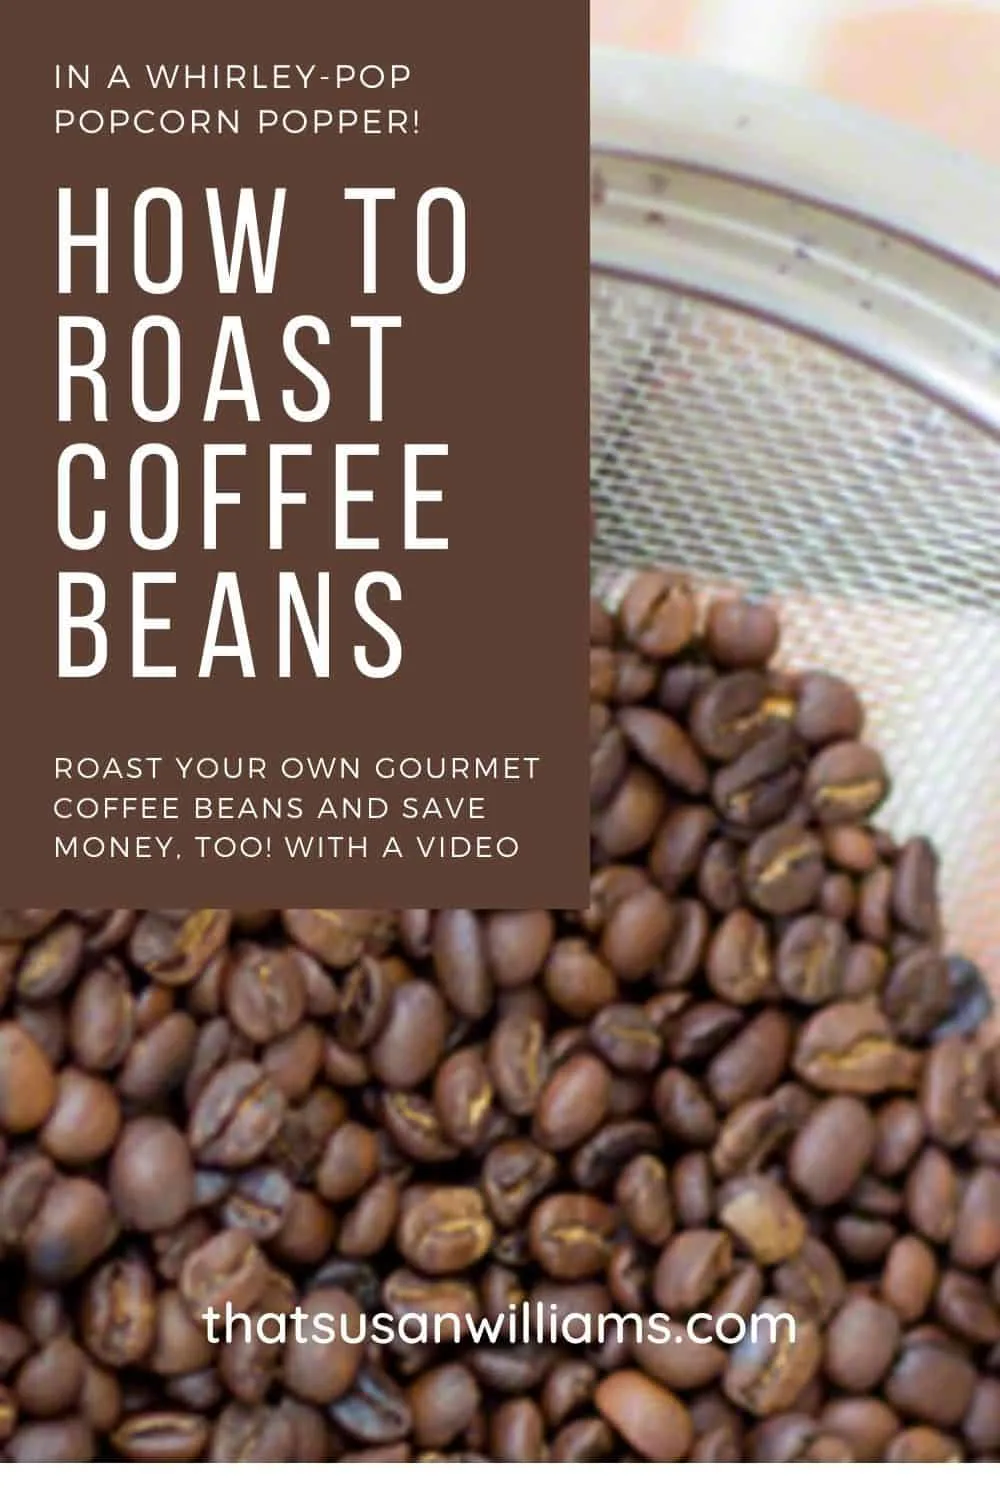 How to Roast Coffee Beans in a Whirley Pop Popcorn Popper